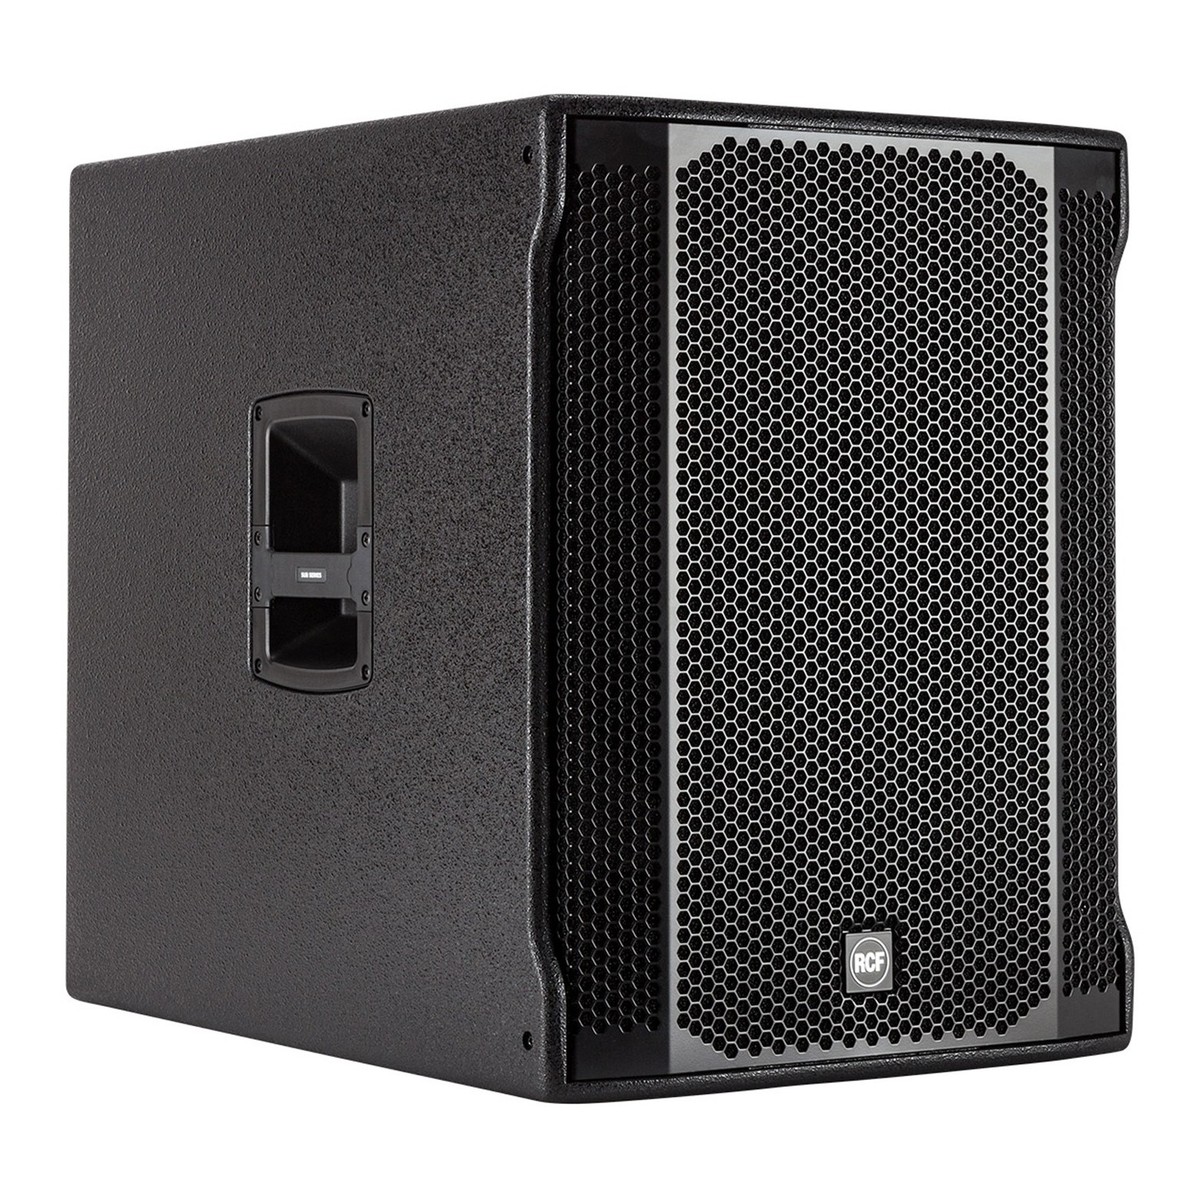 RCF SUB 708-AS II Active Subwoofer